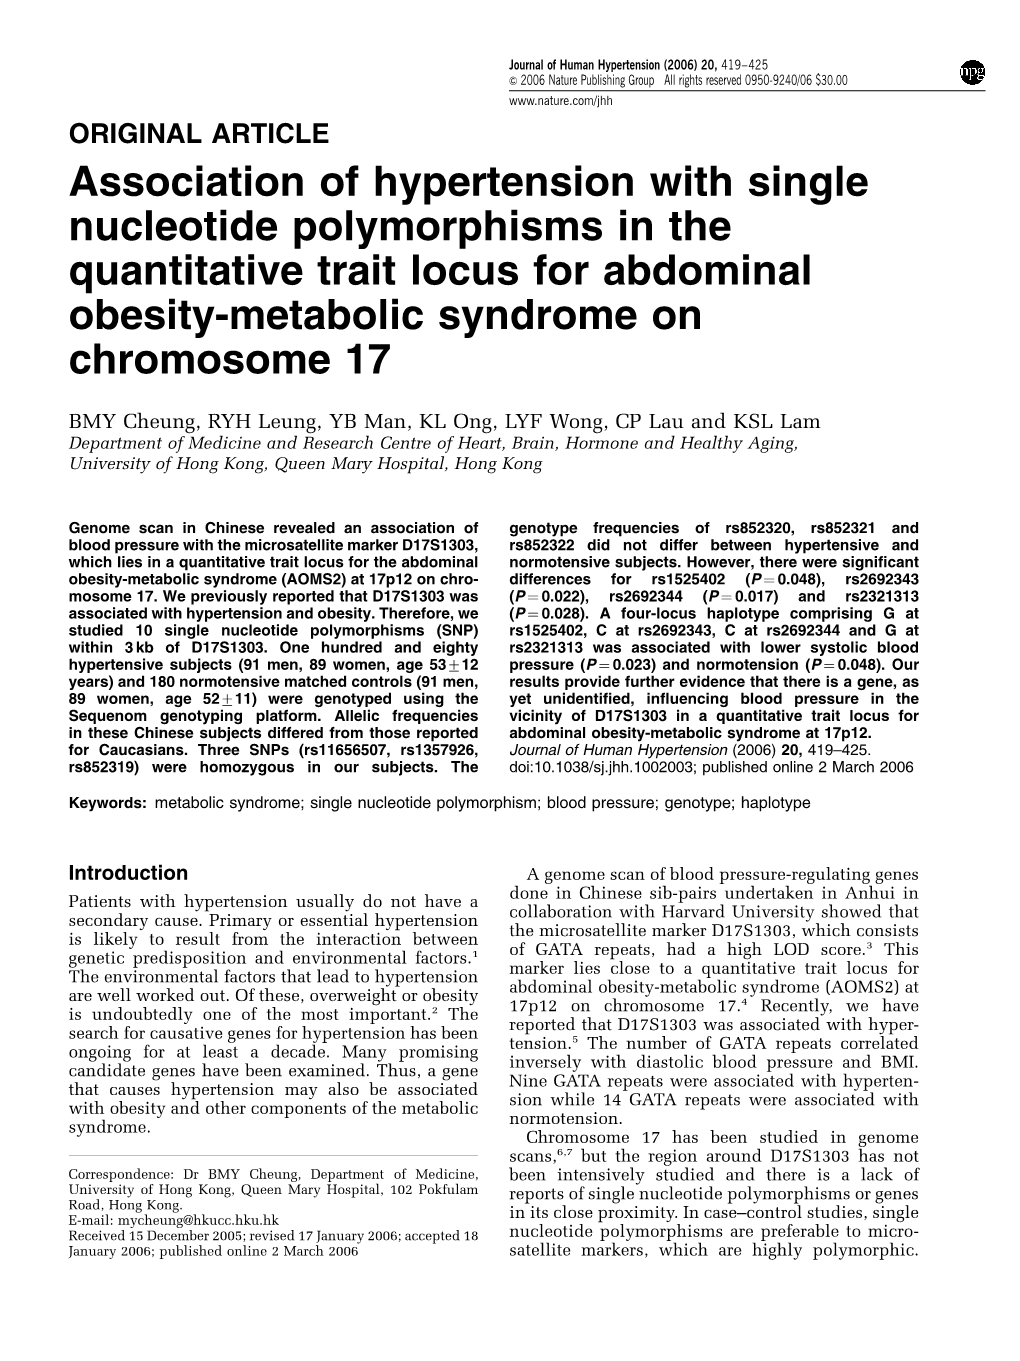 Association of Hypertension with Single Nucleotide Polymorphisms in the Quantitative Trait Locus for Abdominal Obesity-Metabolic Syndrome on Chromosome 17